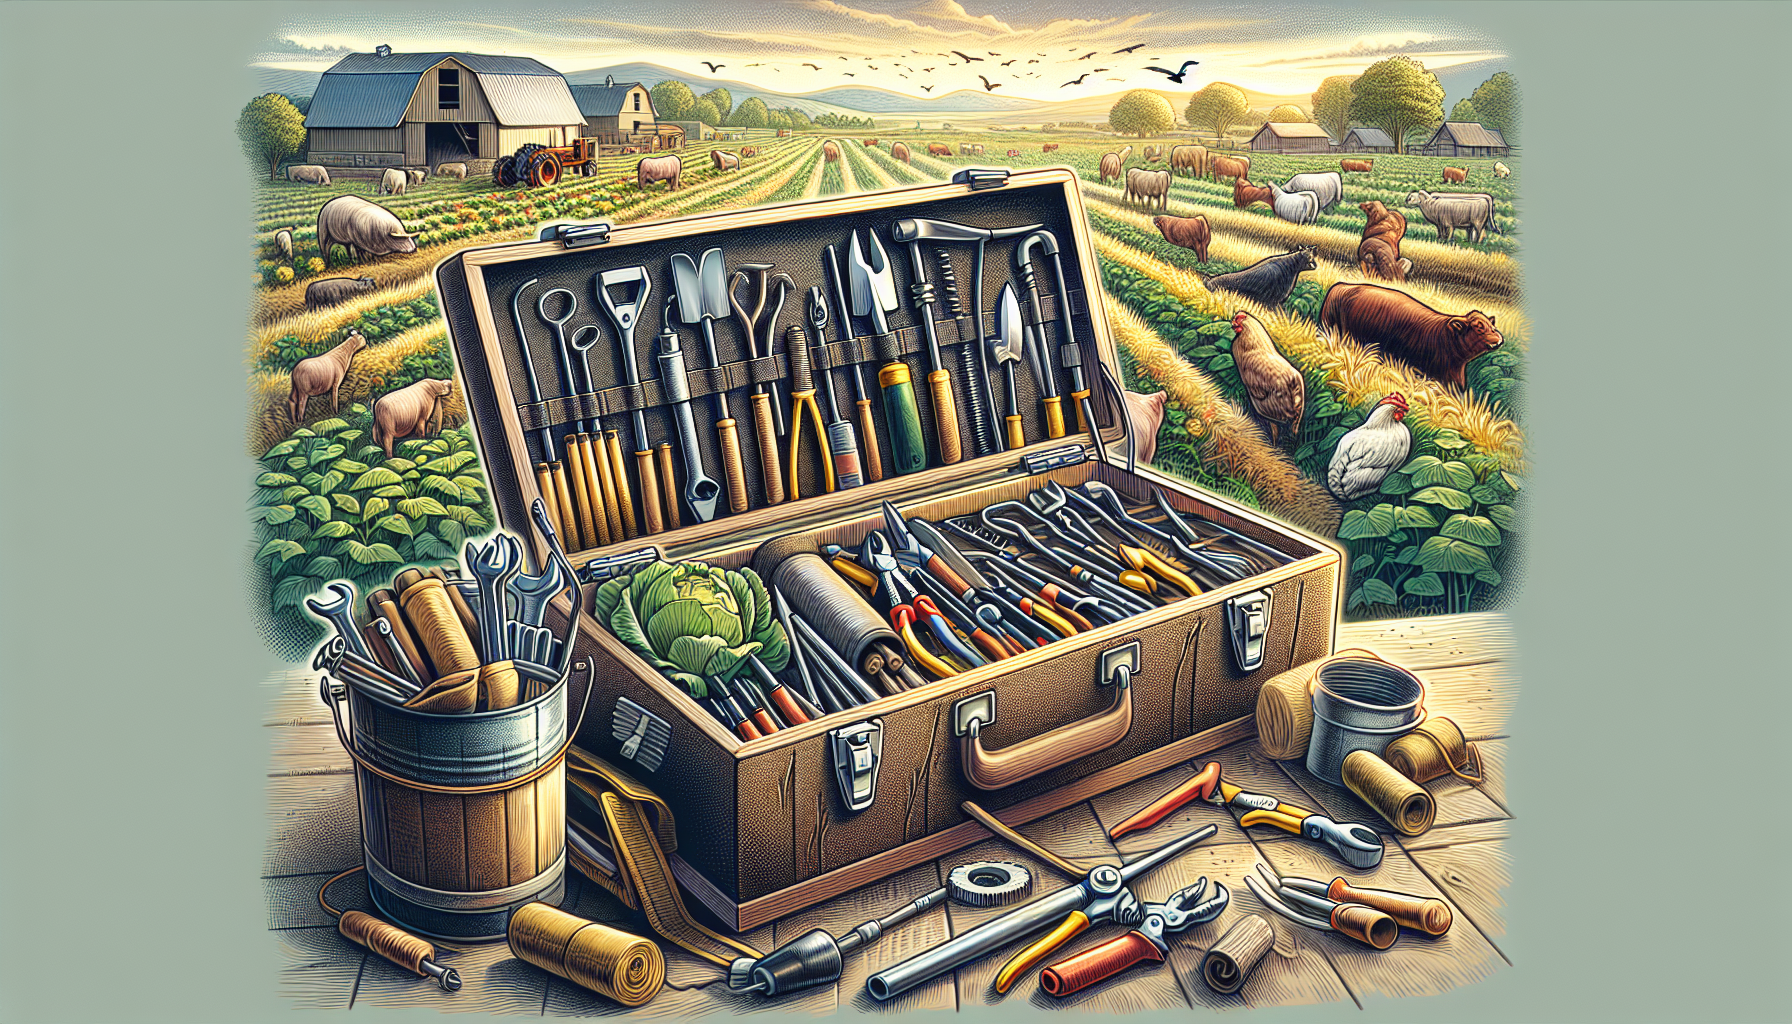 How To Choose The Best Farm Tools For Your Needs